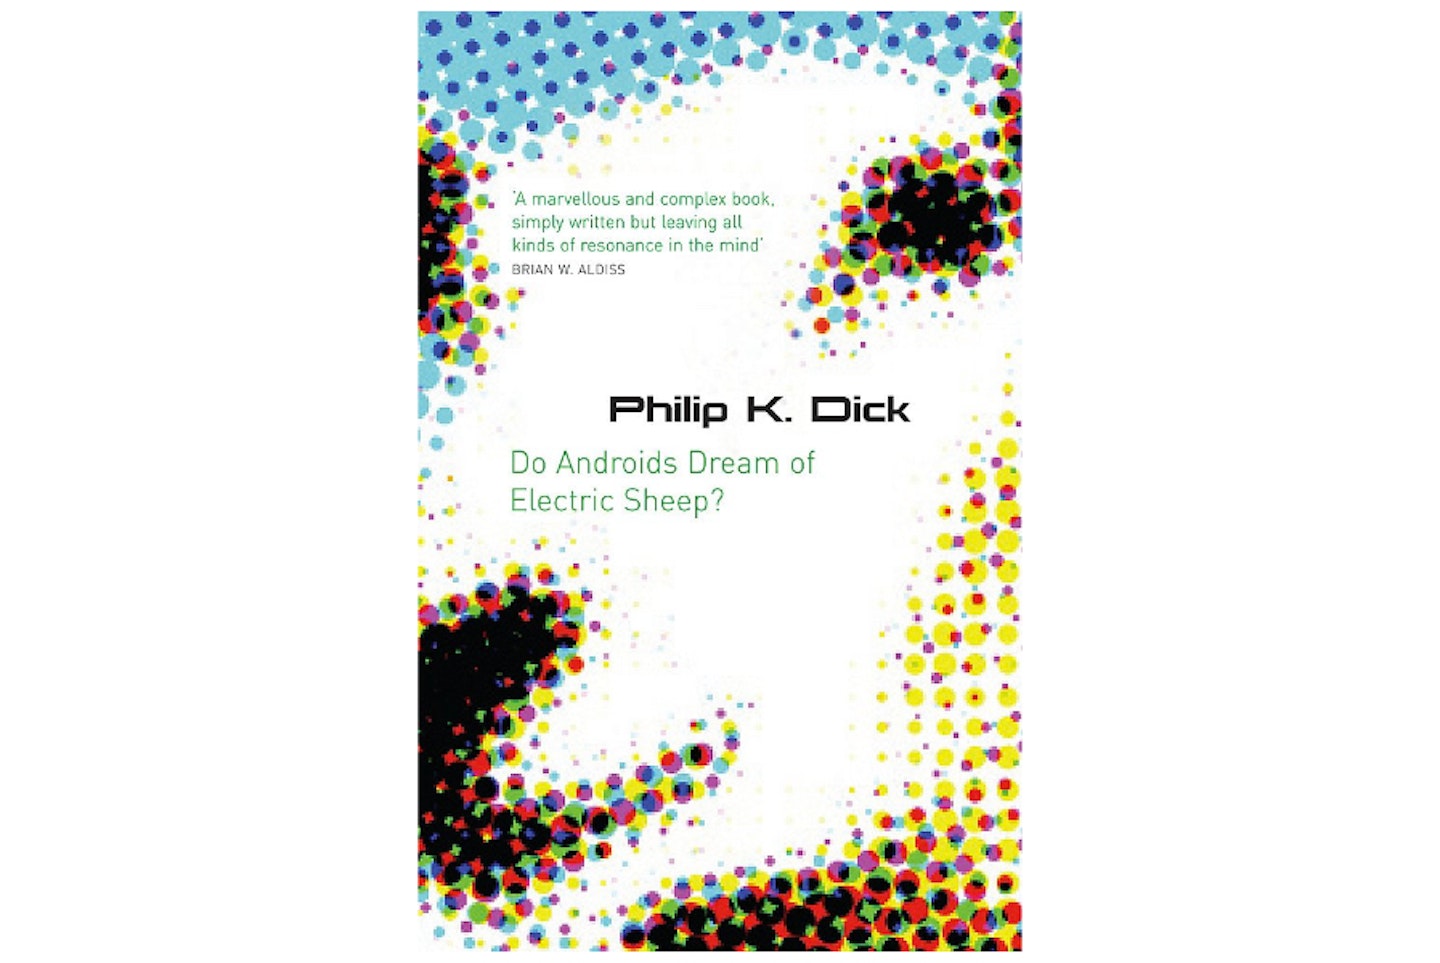 Do Androids Dream of Electric Sheep? by P.K. Dick, £7.99